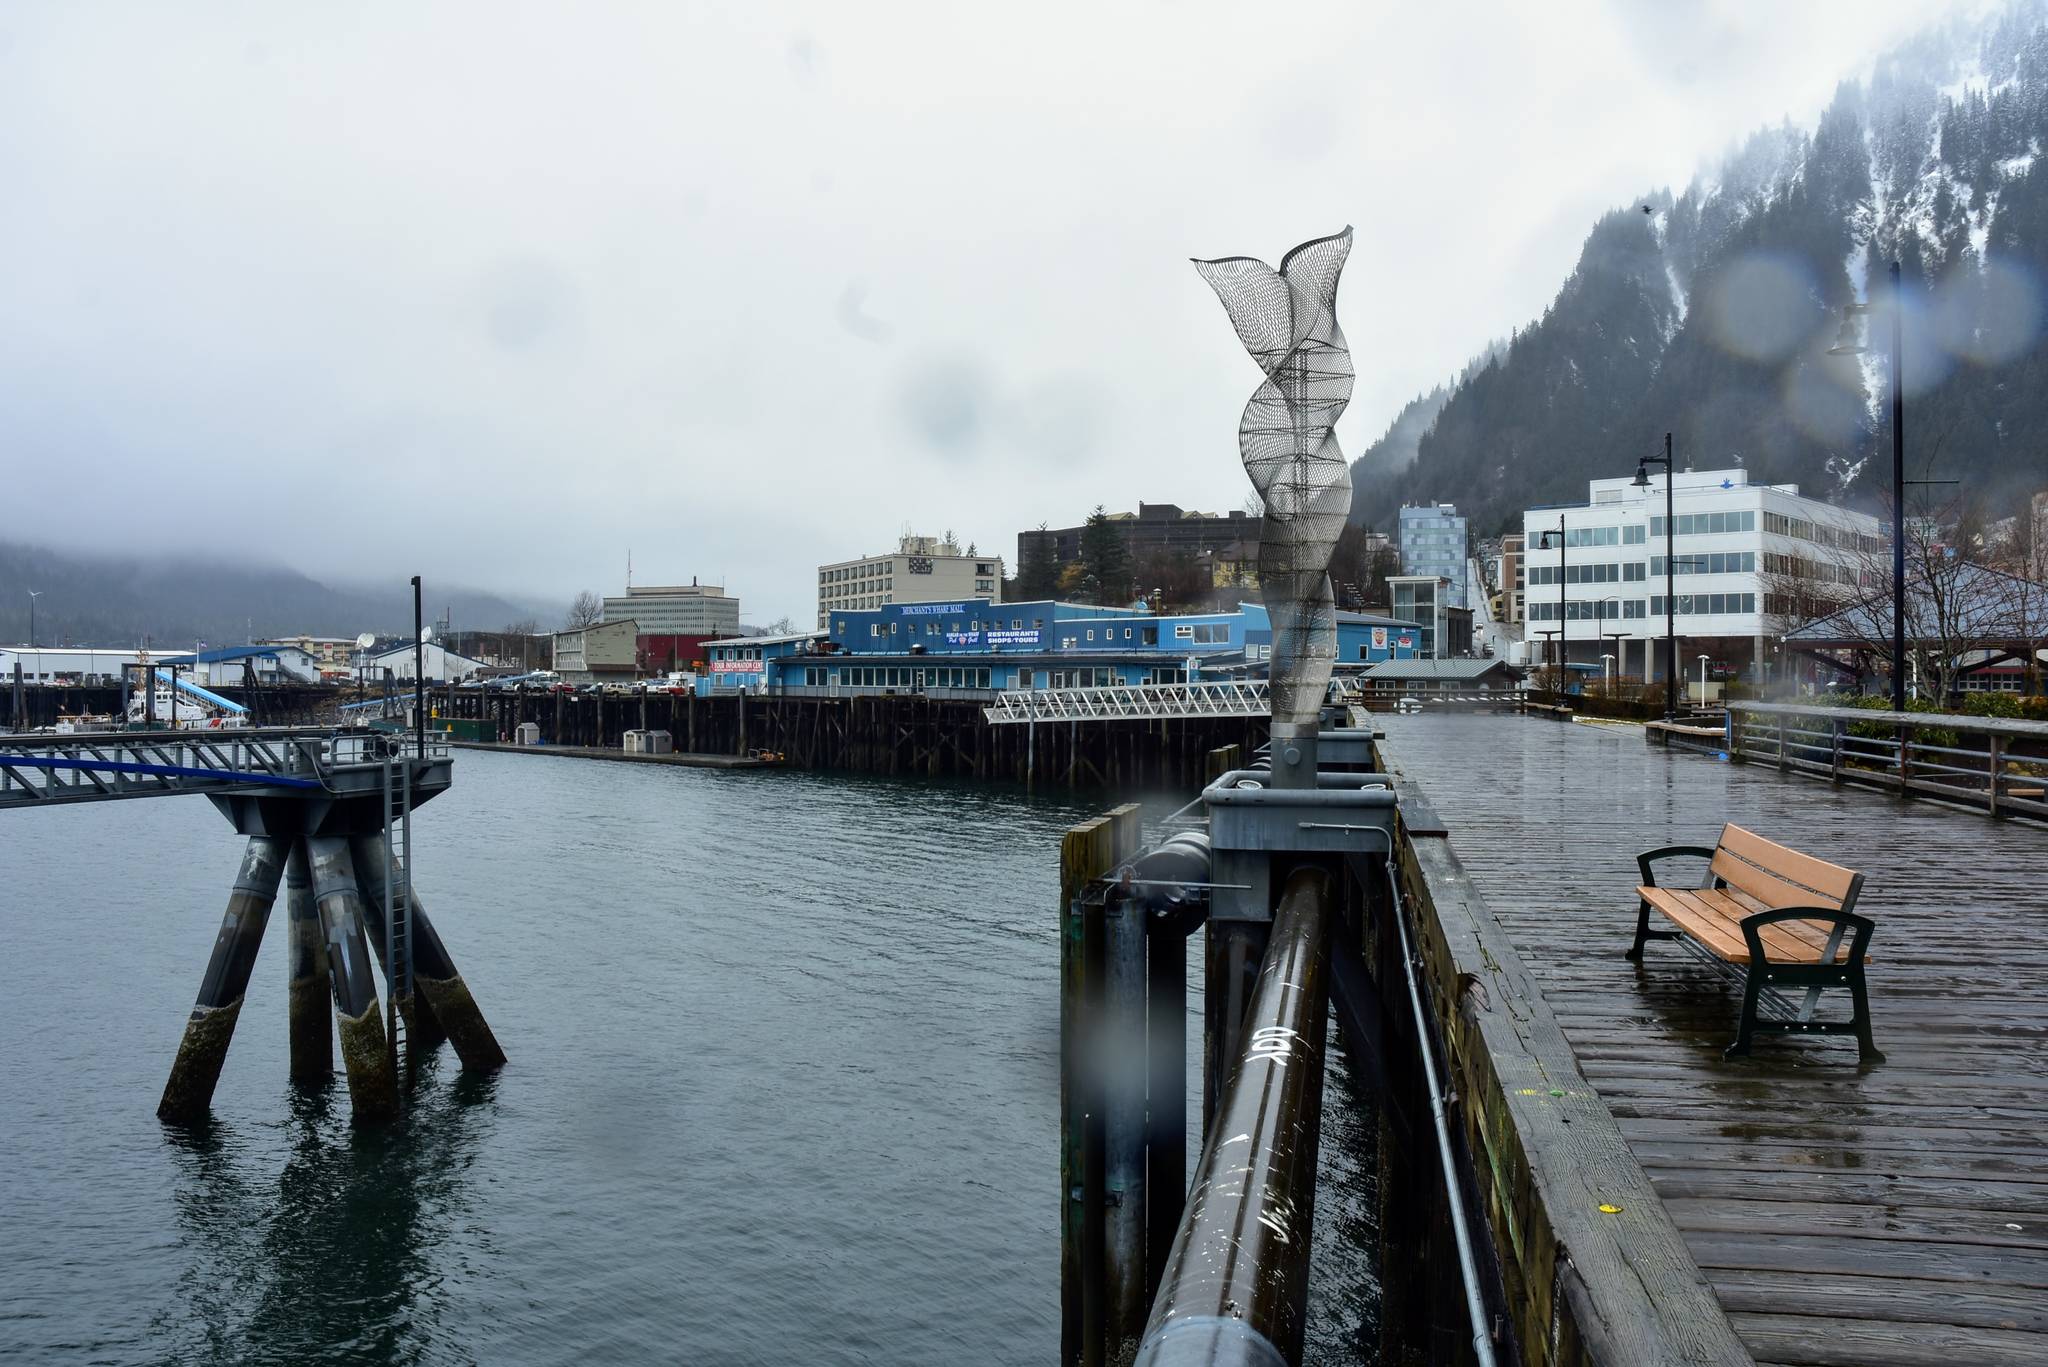 Juneau’s downtown waterfront sits empty on Monday, April 5, 2021. In a typical year businesses would be getting ready for the flood of local tourists but with the COVID-19 pandemic still ongoing, Alaska’s cruise ship season remains uncertain. (Peter Segall / Juneau Empire)